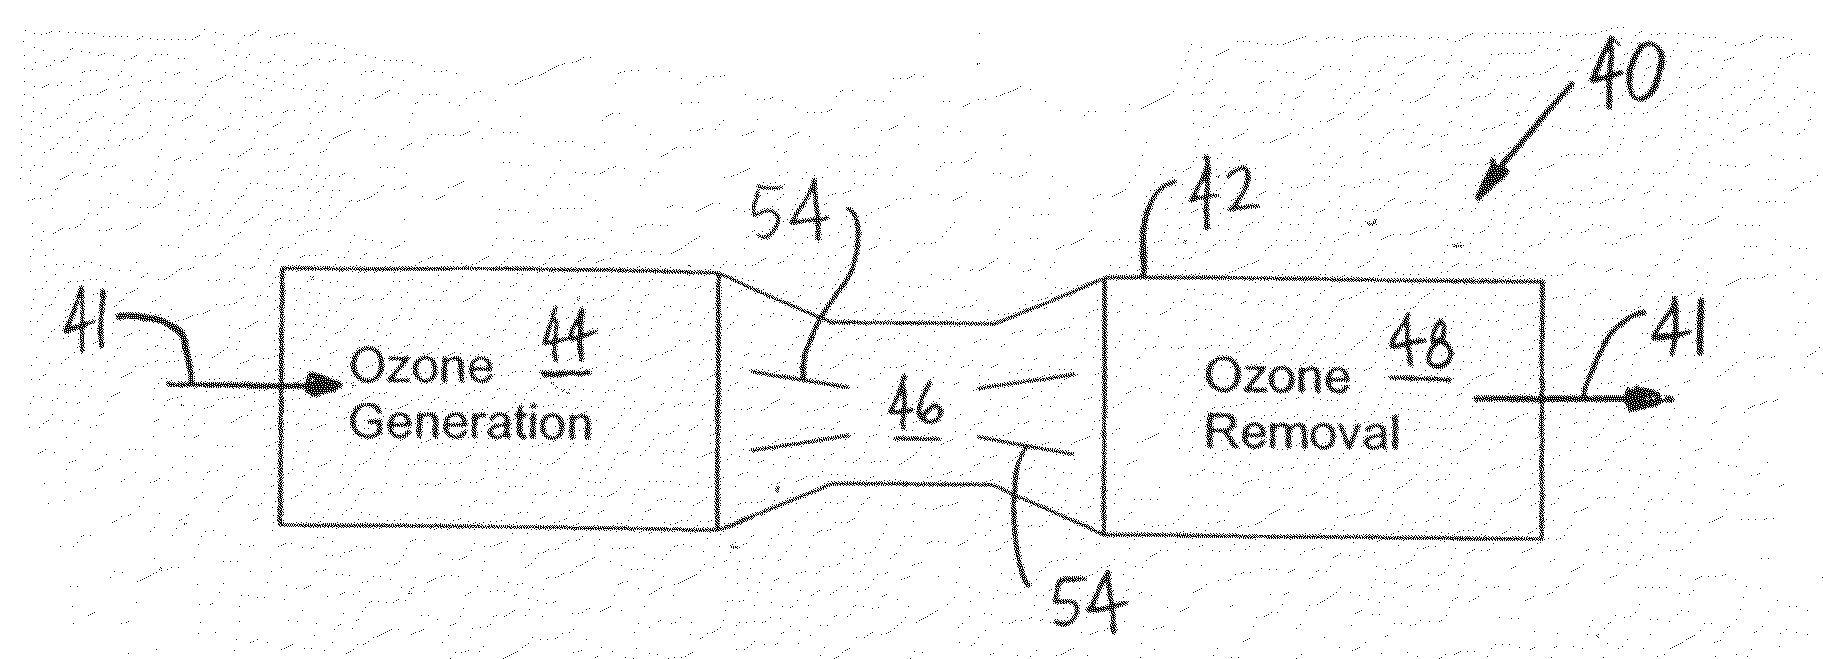 Apparatus and method for treating impurities in air and materials